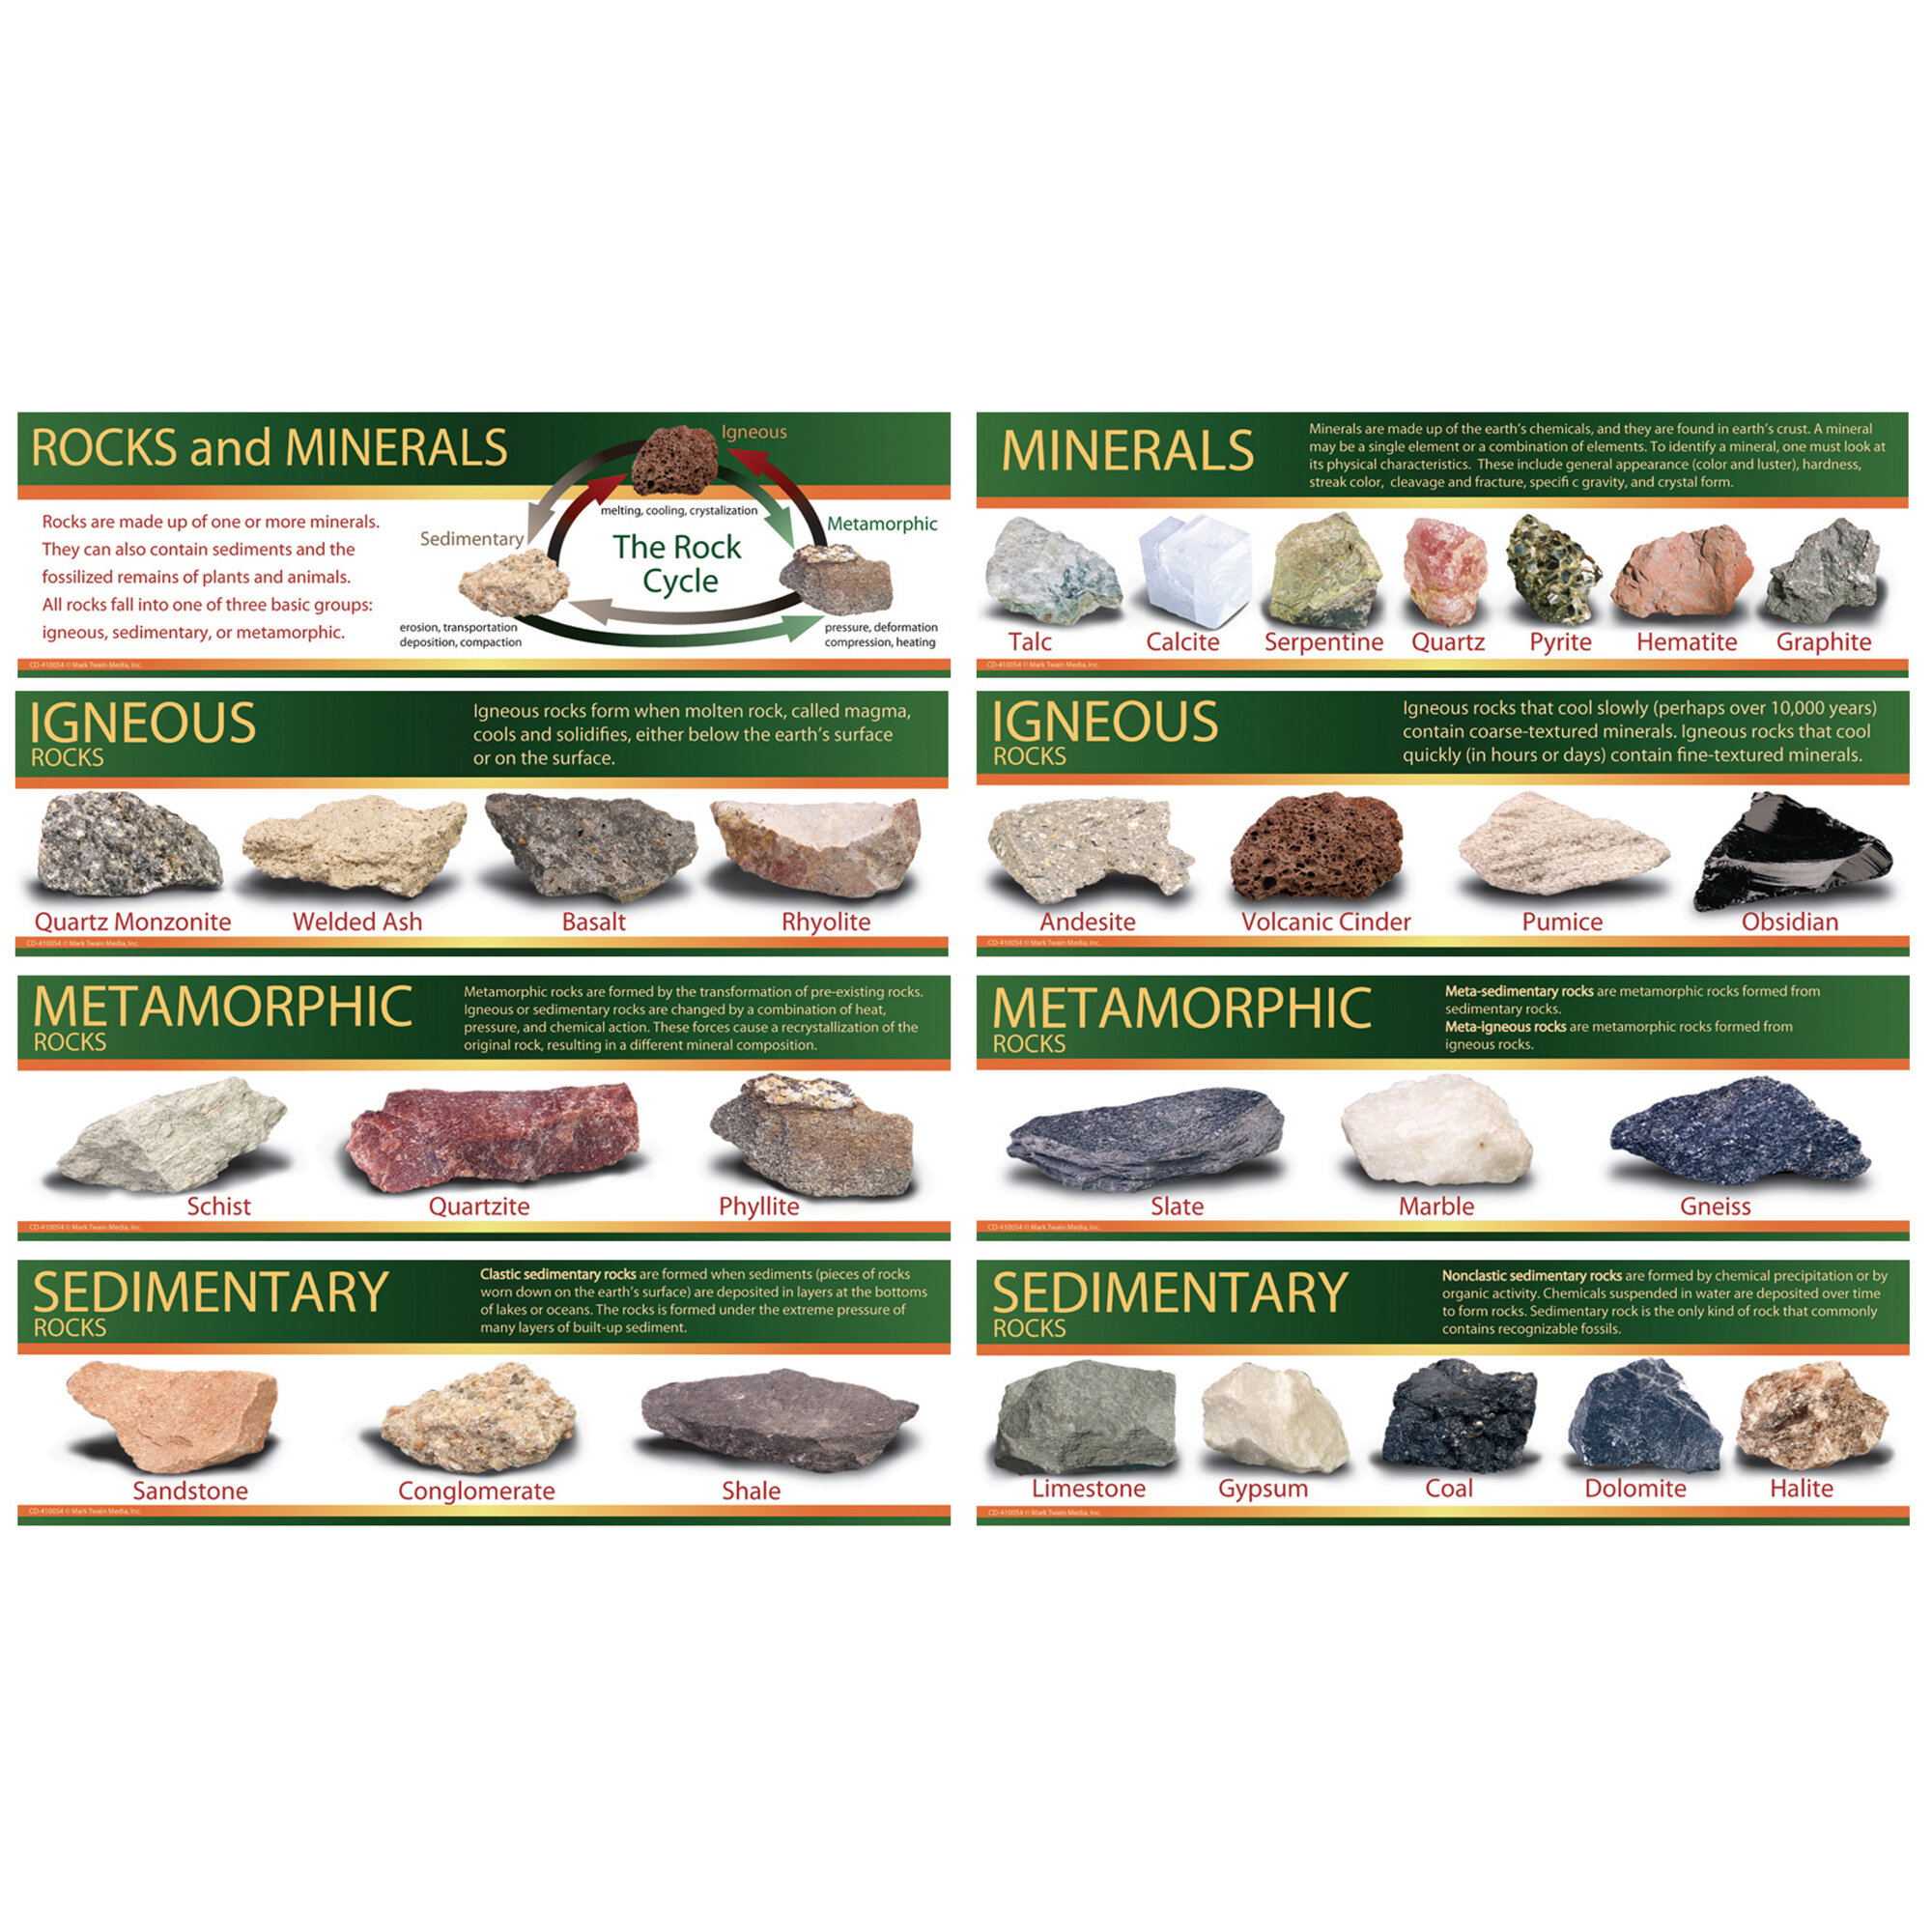 Identifying Rocks And Minerals Chart